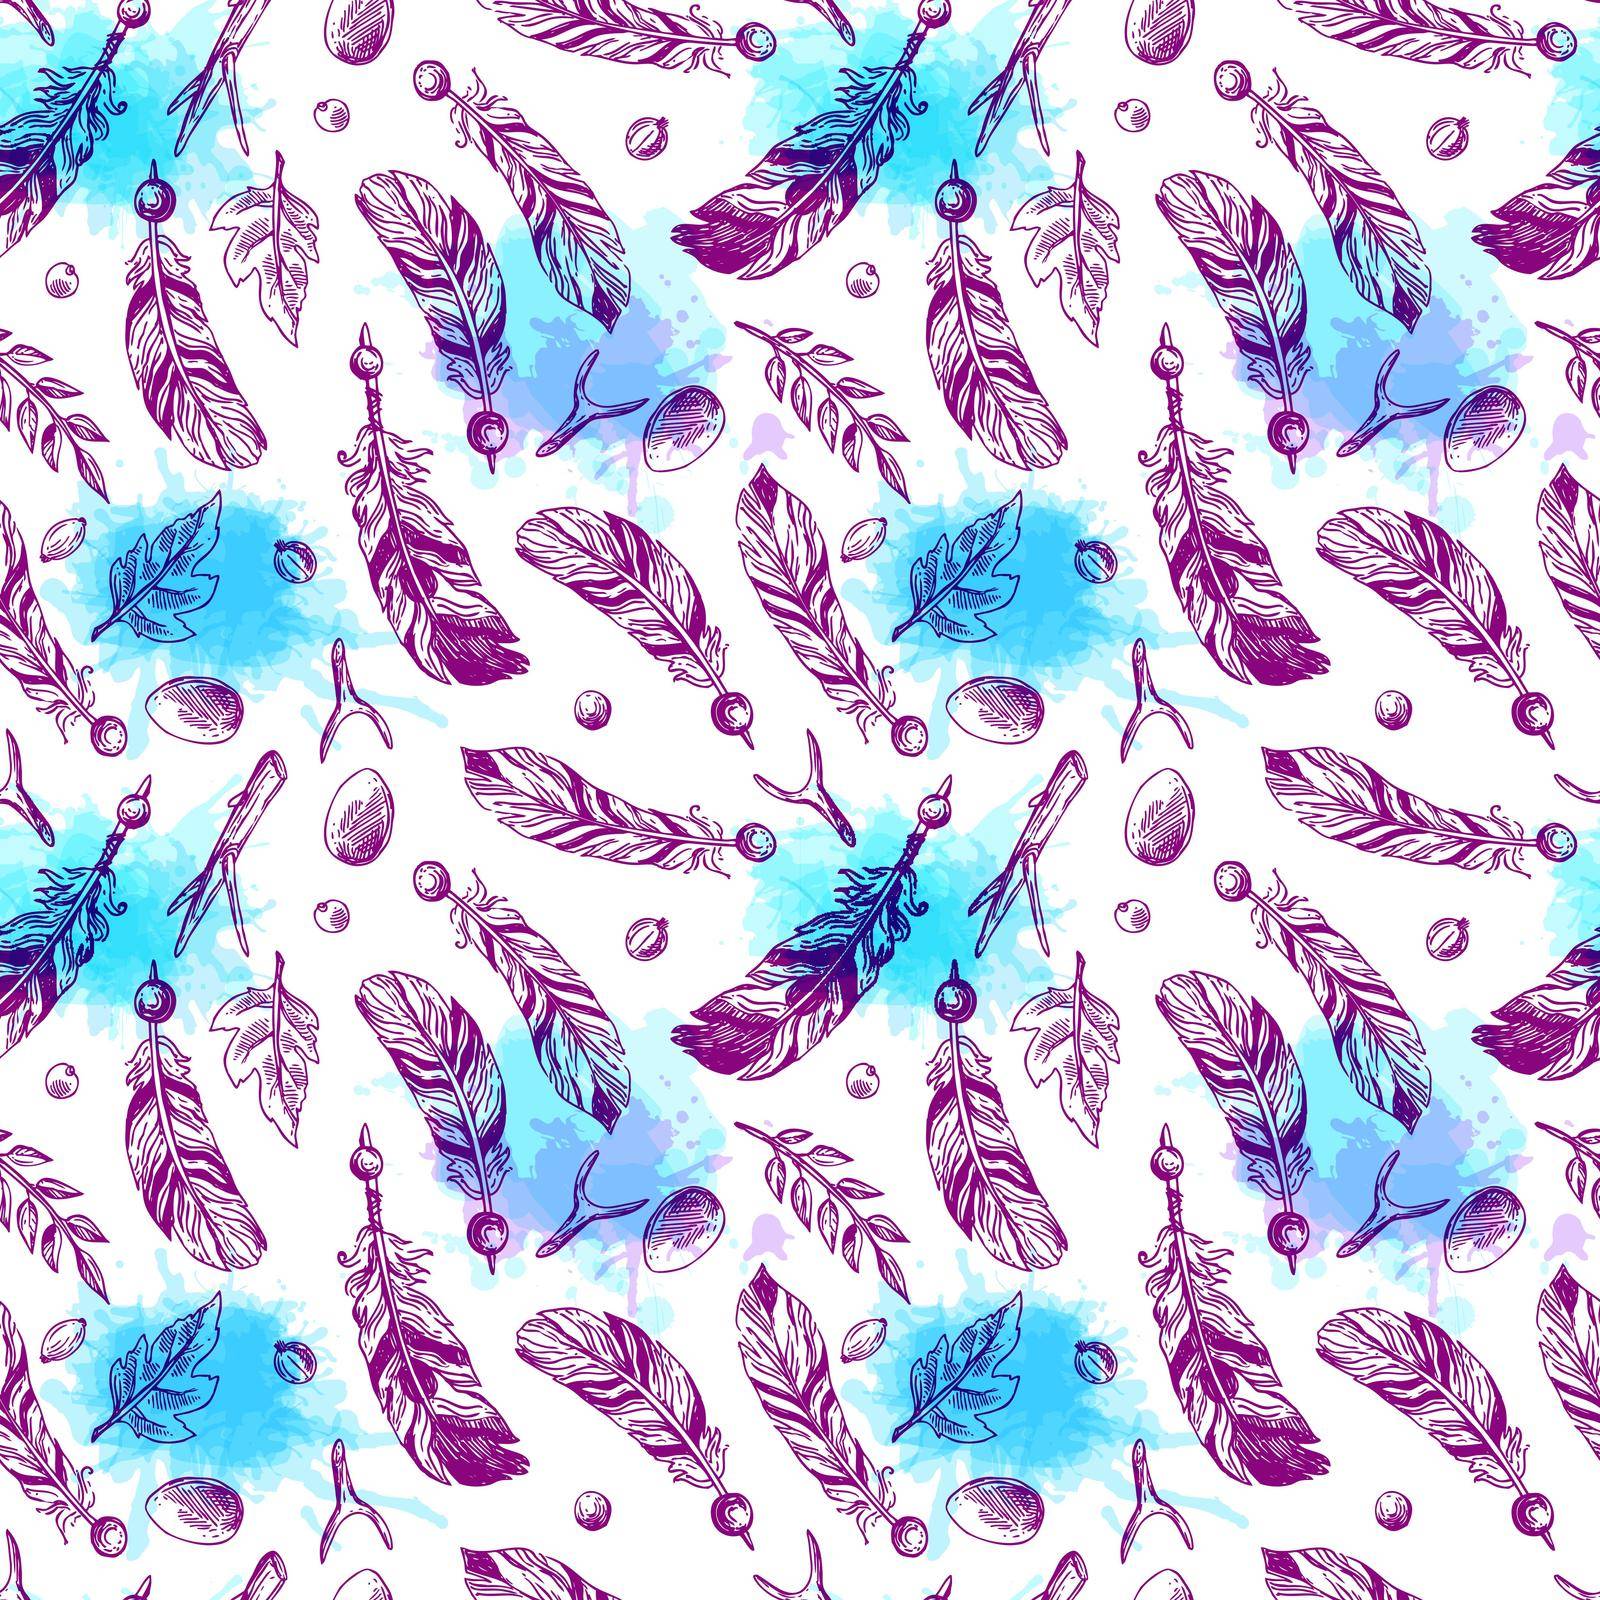 Hand drawn vector seamless pattern with feathers. Boho style drawing.